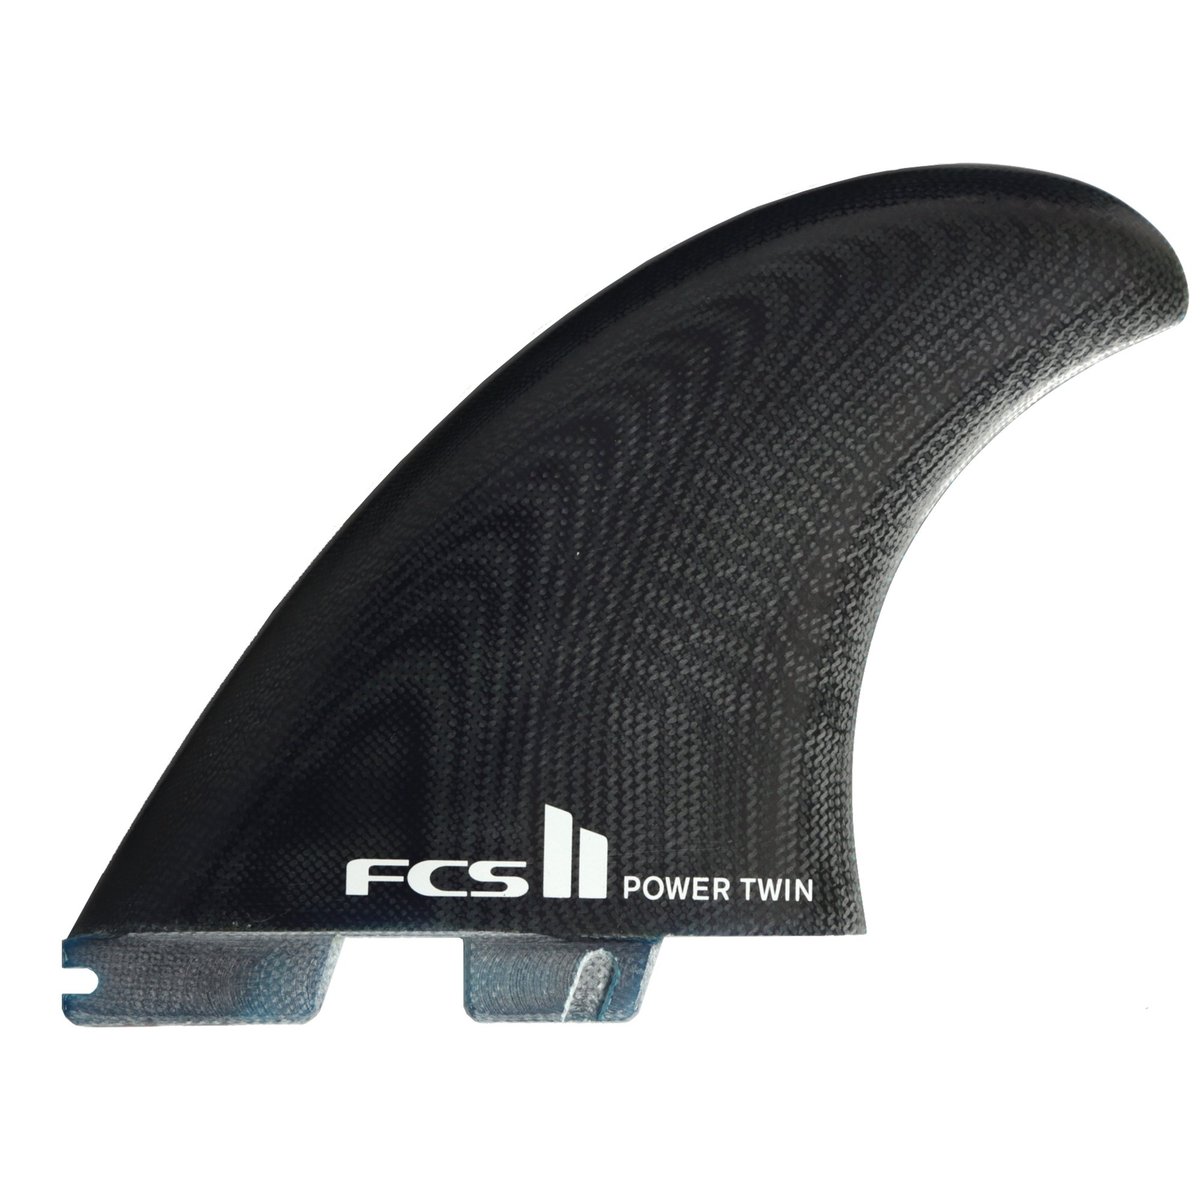 FCS POWER TWIN + １ SET Specialty Series fin